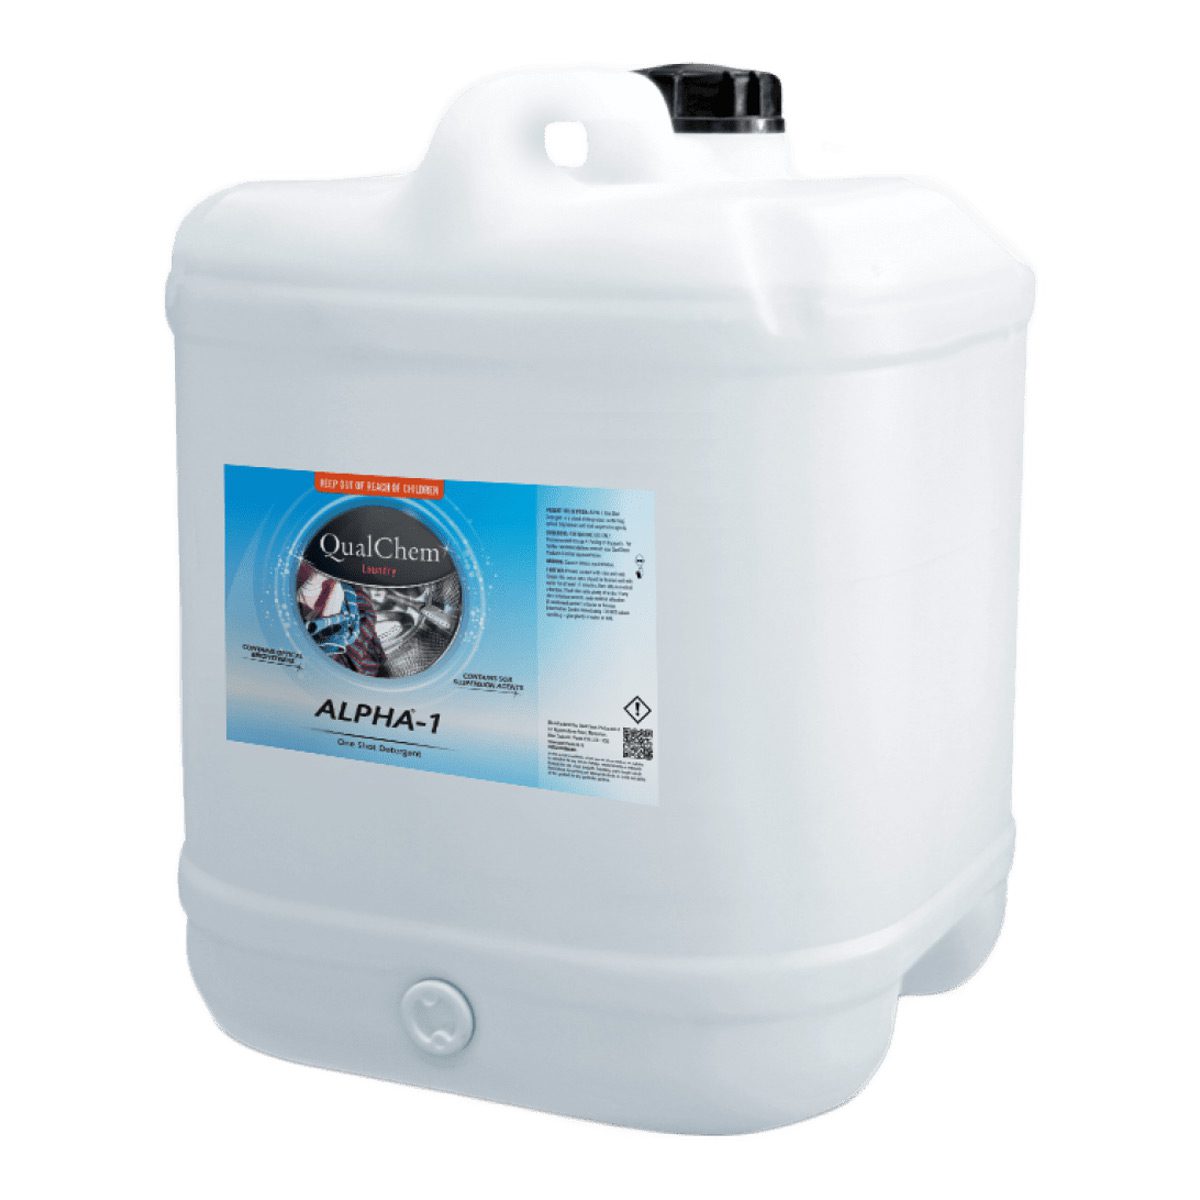 cleaning-products-laundry-qualchem-alpha-1-laundry-one-shot-detergent-20L-litre-highly-built-concentrated-commercial-liquid-laundry-detergent-commercial-laundry-machines-vjs-distributors-ALPHA-1